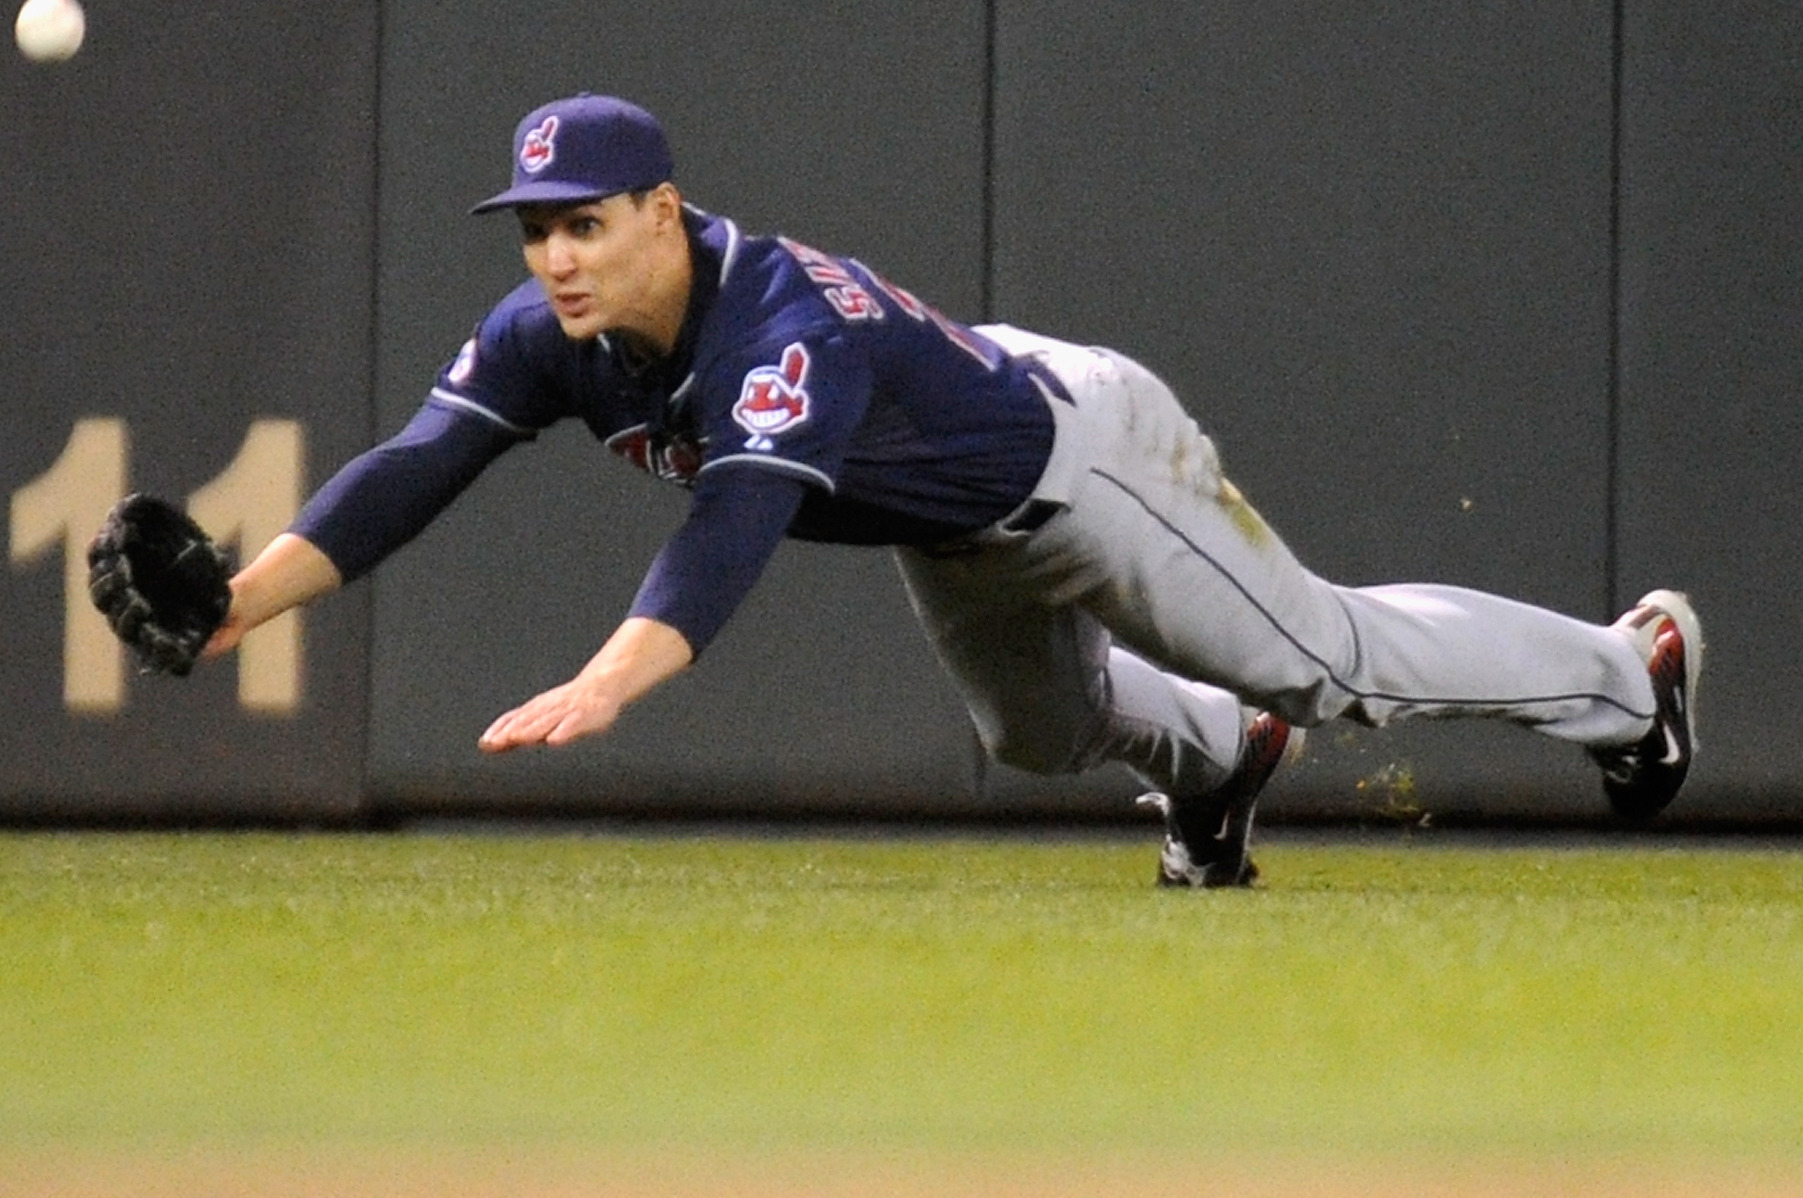 Indians OF Grady Sizemore to miss opening day